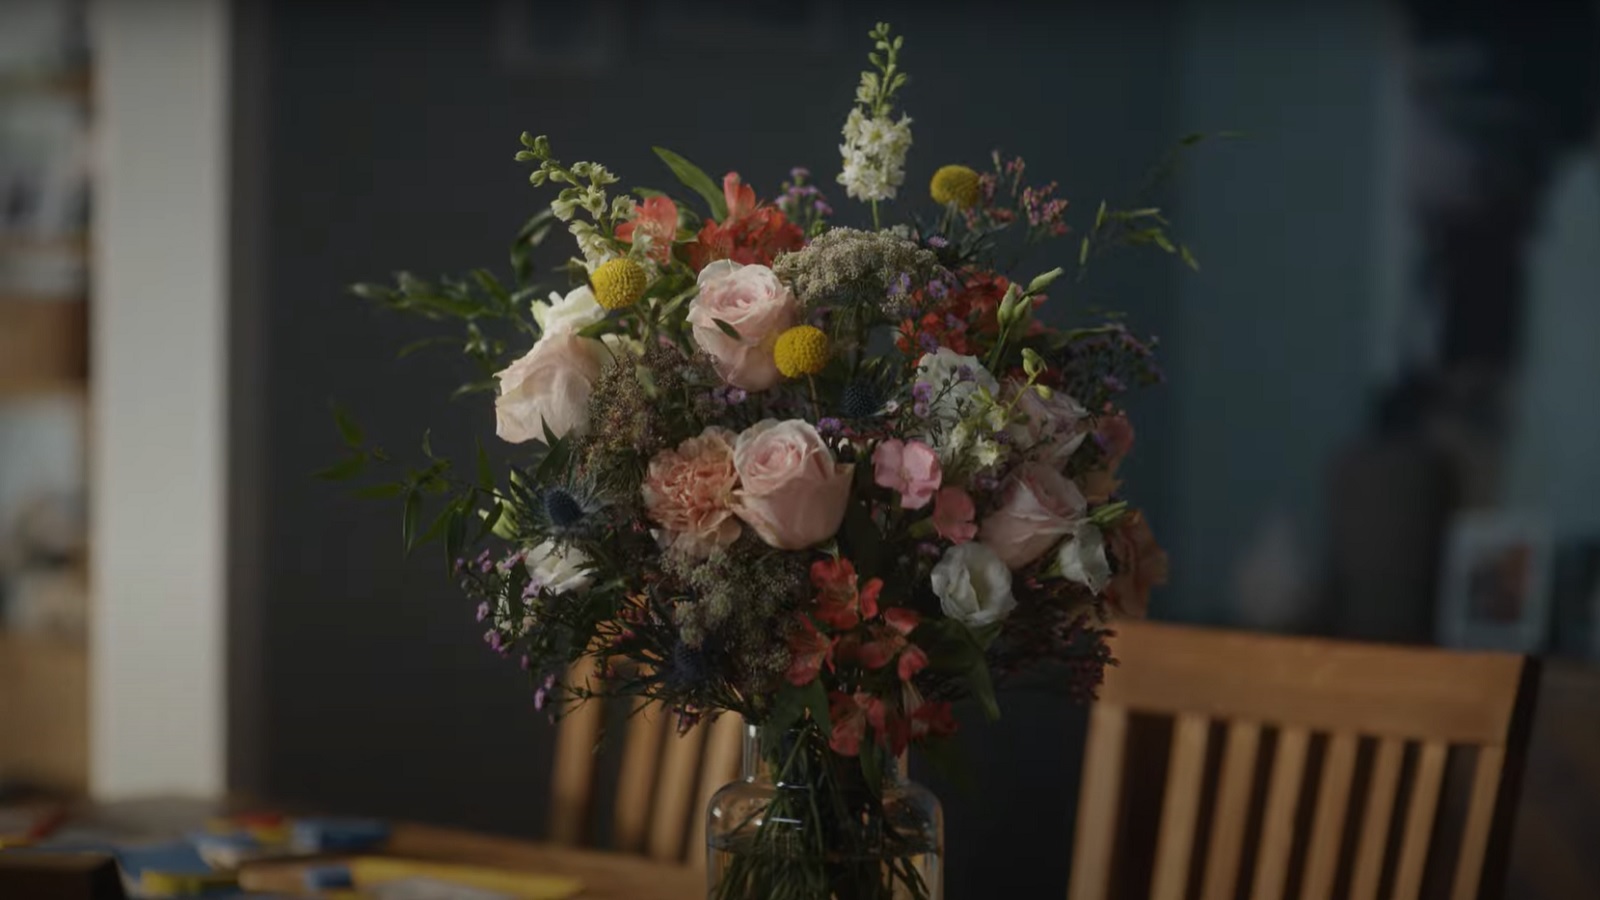 Floral Arrangement Holds More Than Beautiful Flowers